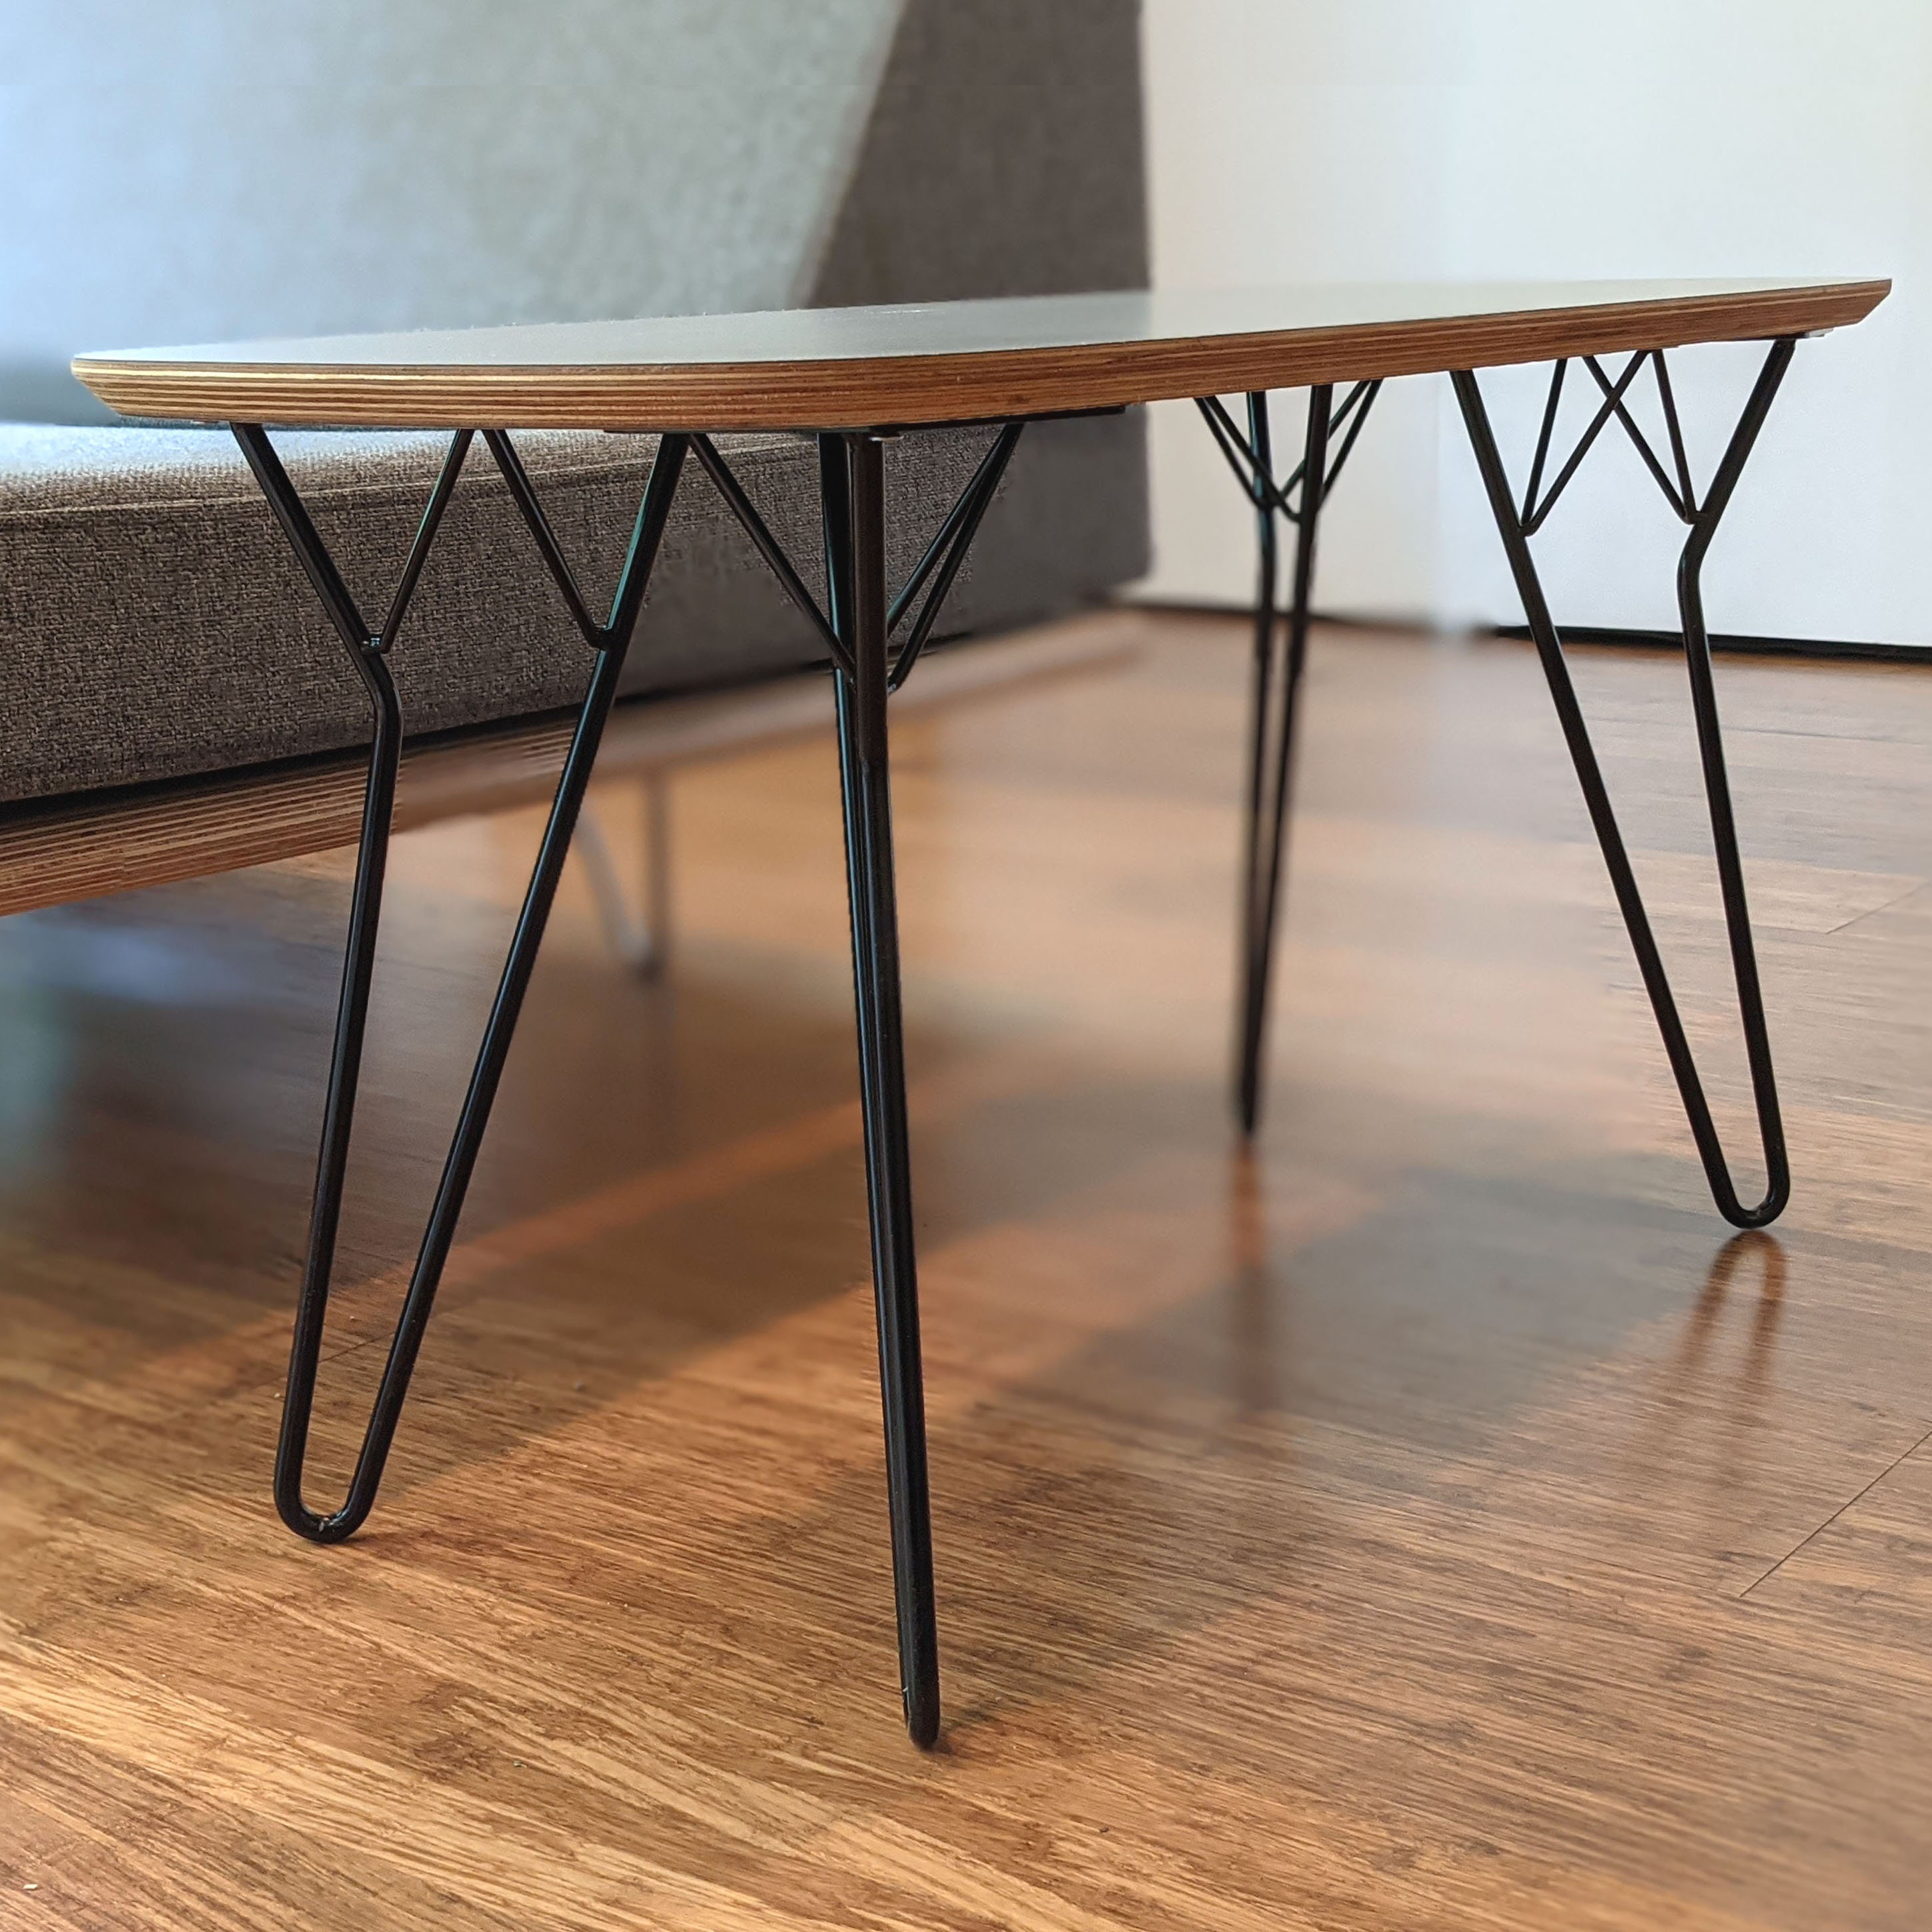 ANTIQUE RETRO 70's VINTAGE STEEL HAIRPIN TABLE LEGS INDUSTRIAL EAMES STYLE 